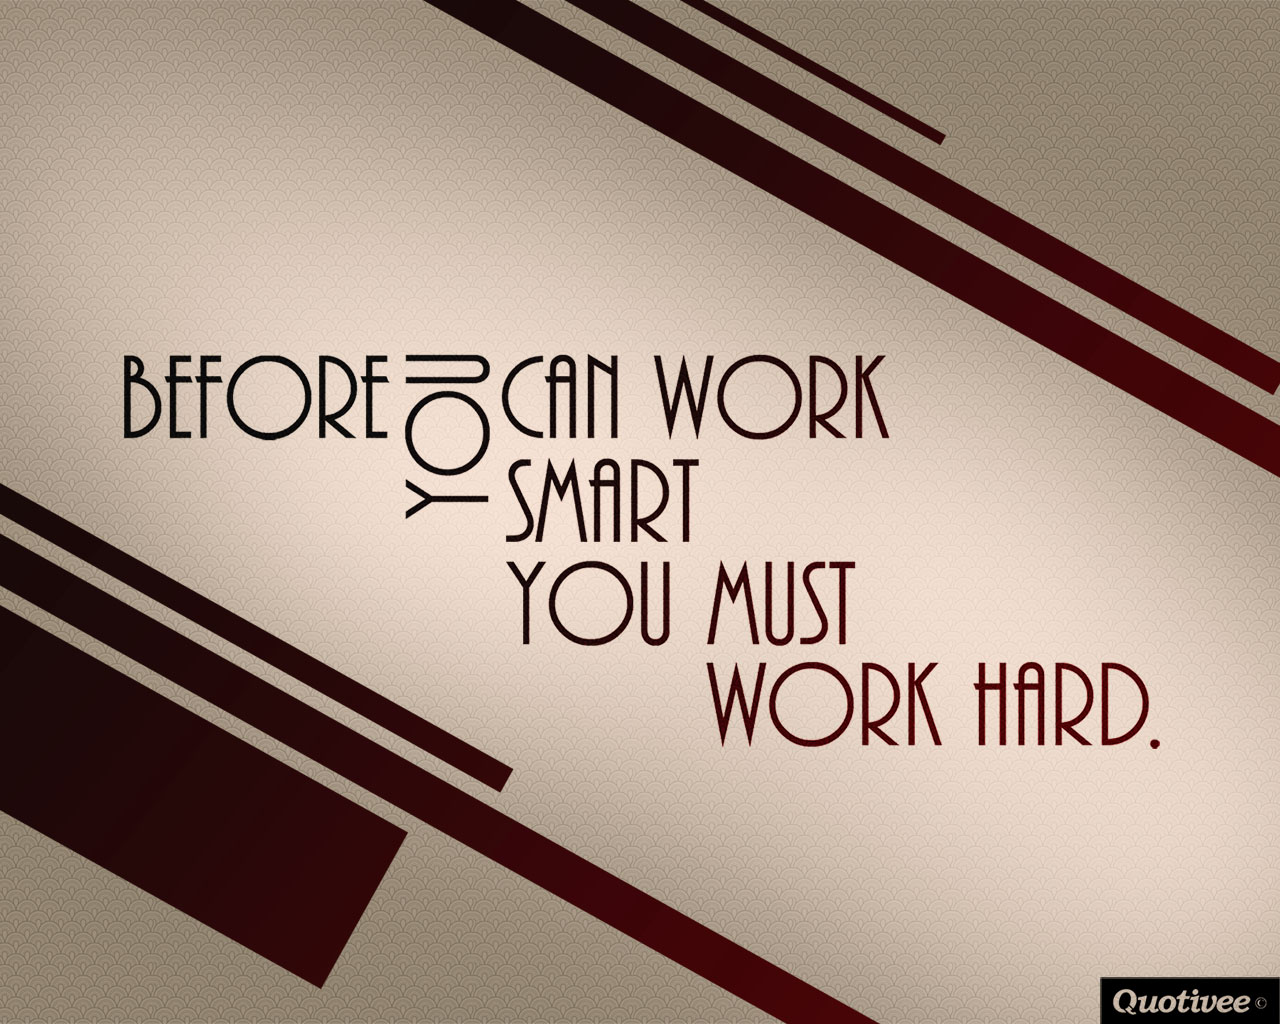 Motivational Wallpaper on Work Hard: Before you can work smart you must work  hard - Dont Give Up World